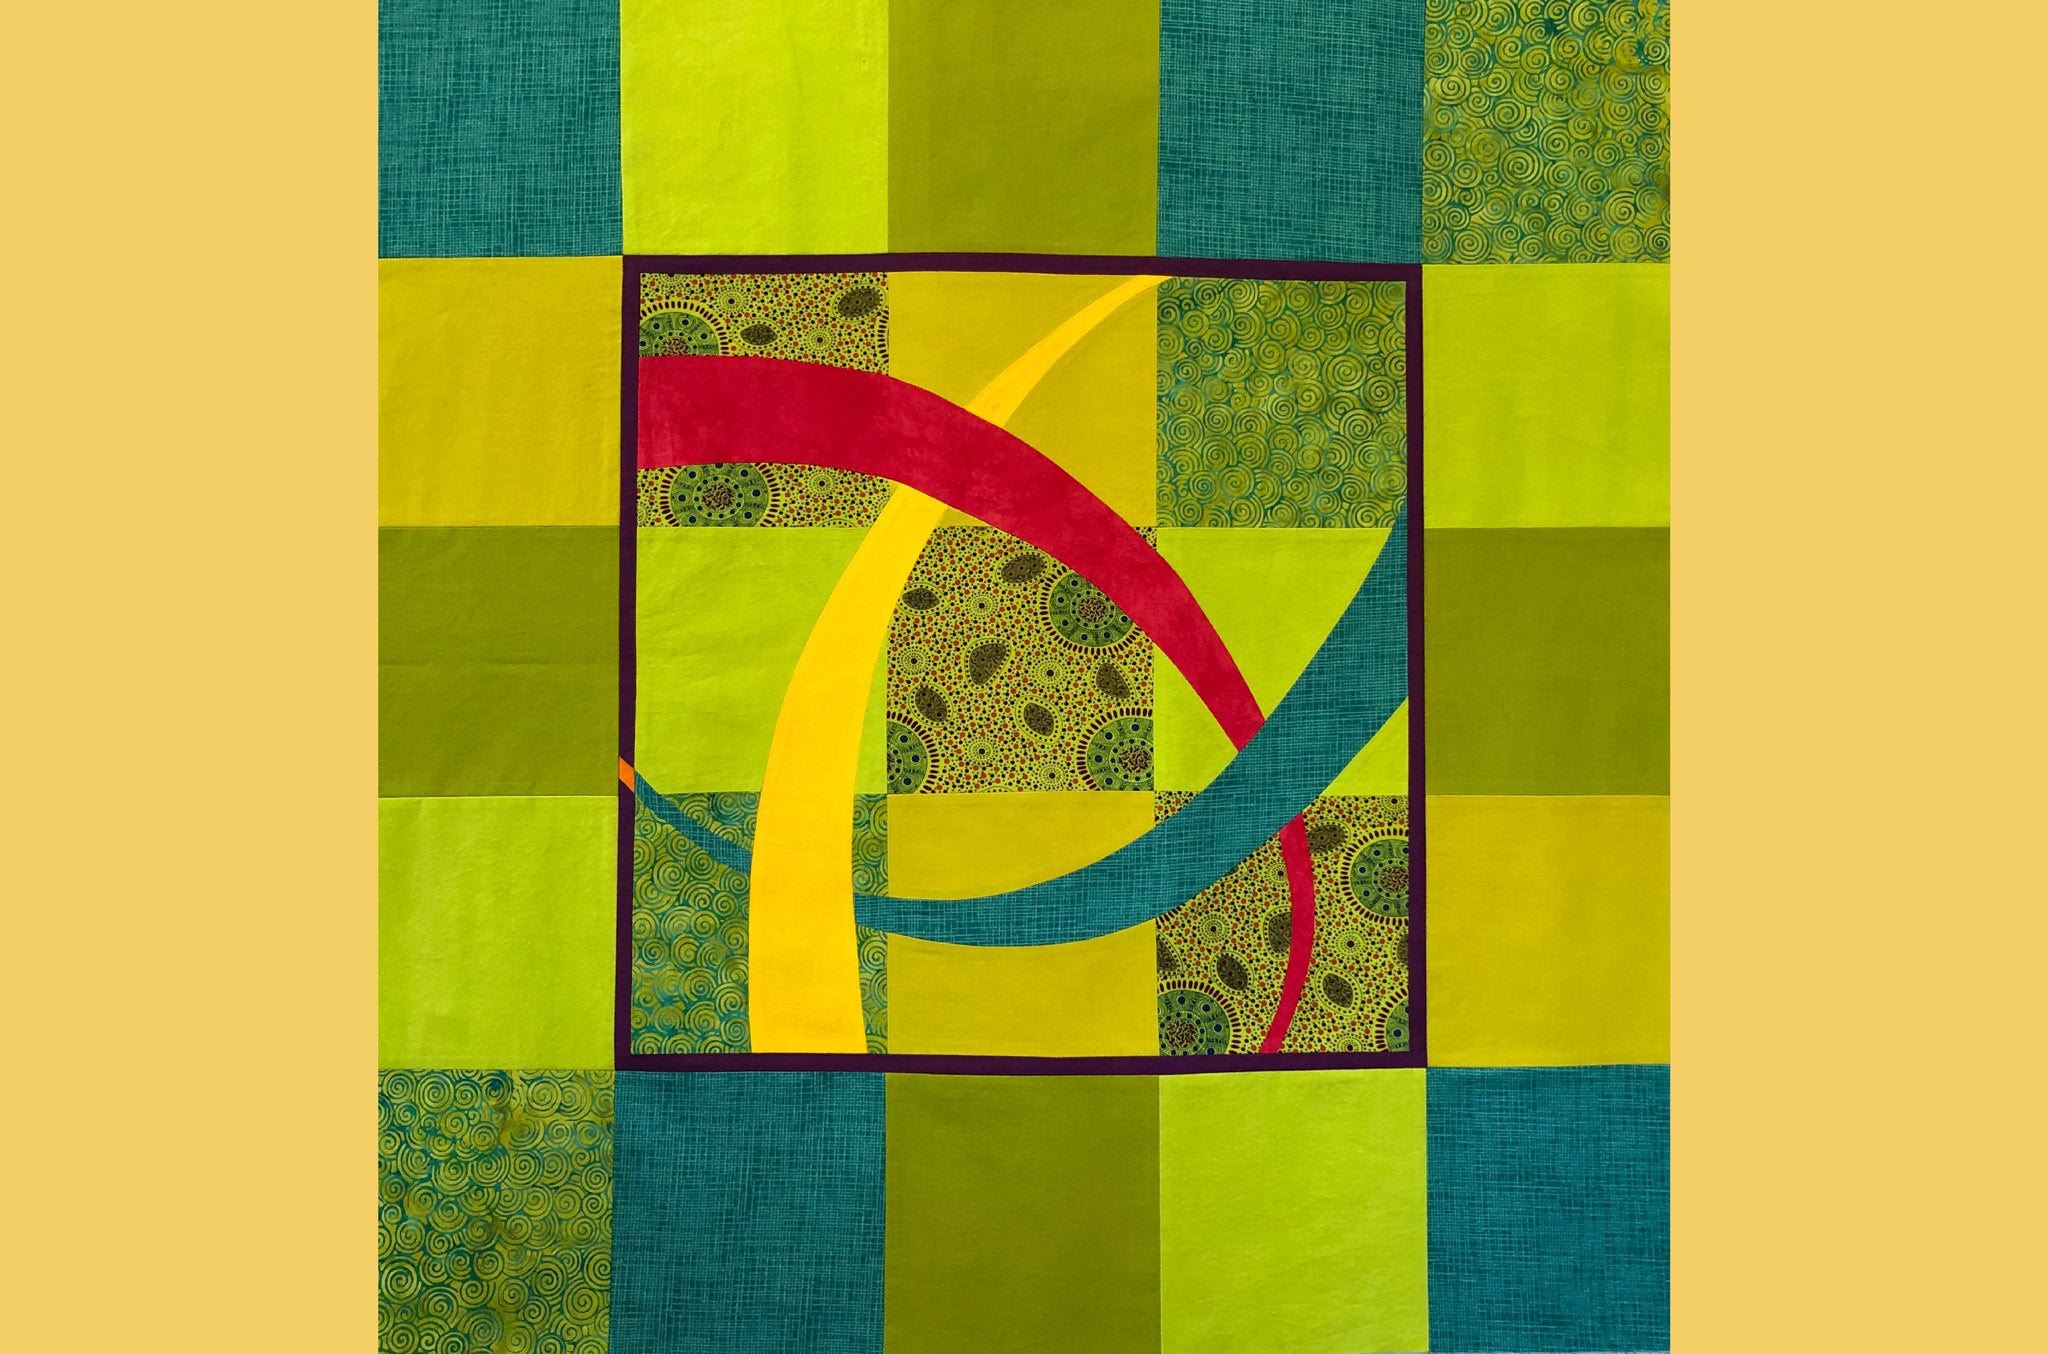 Centrum Quilt, a homework project from the Creativity & Inserted Curves Workshop taught by Patricia Belyea of Okan Arts